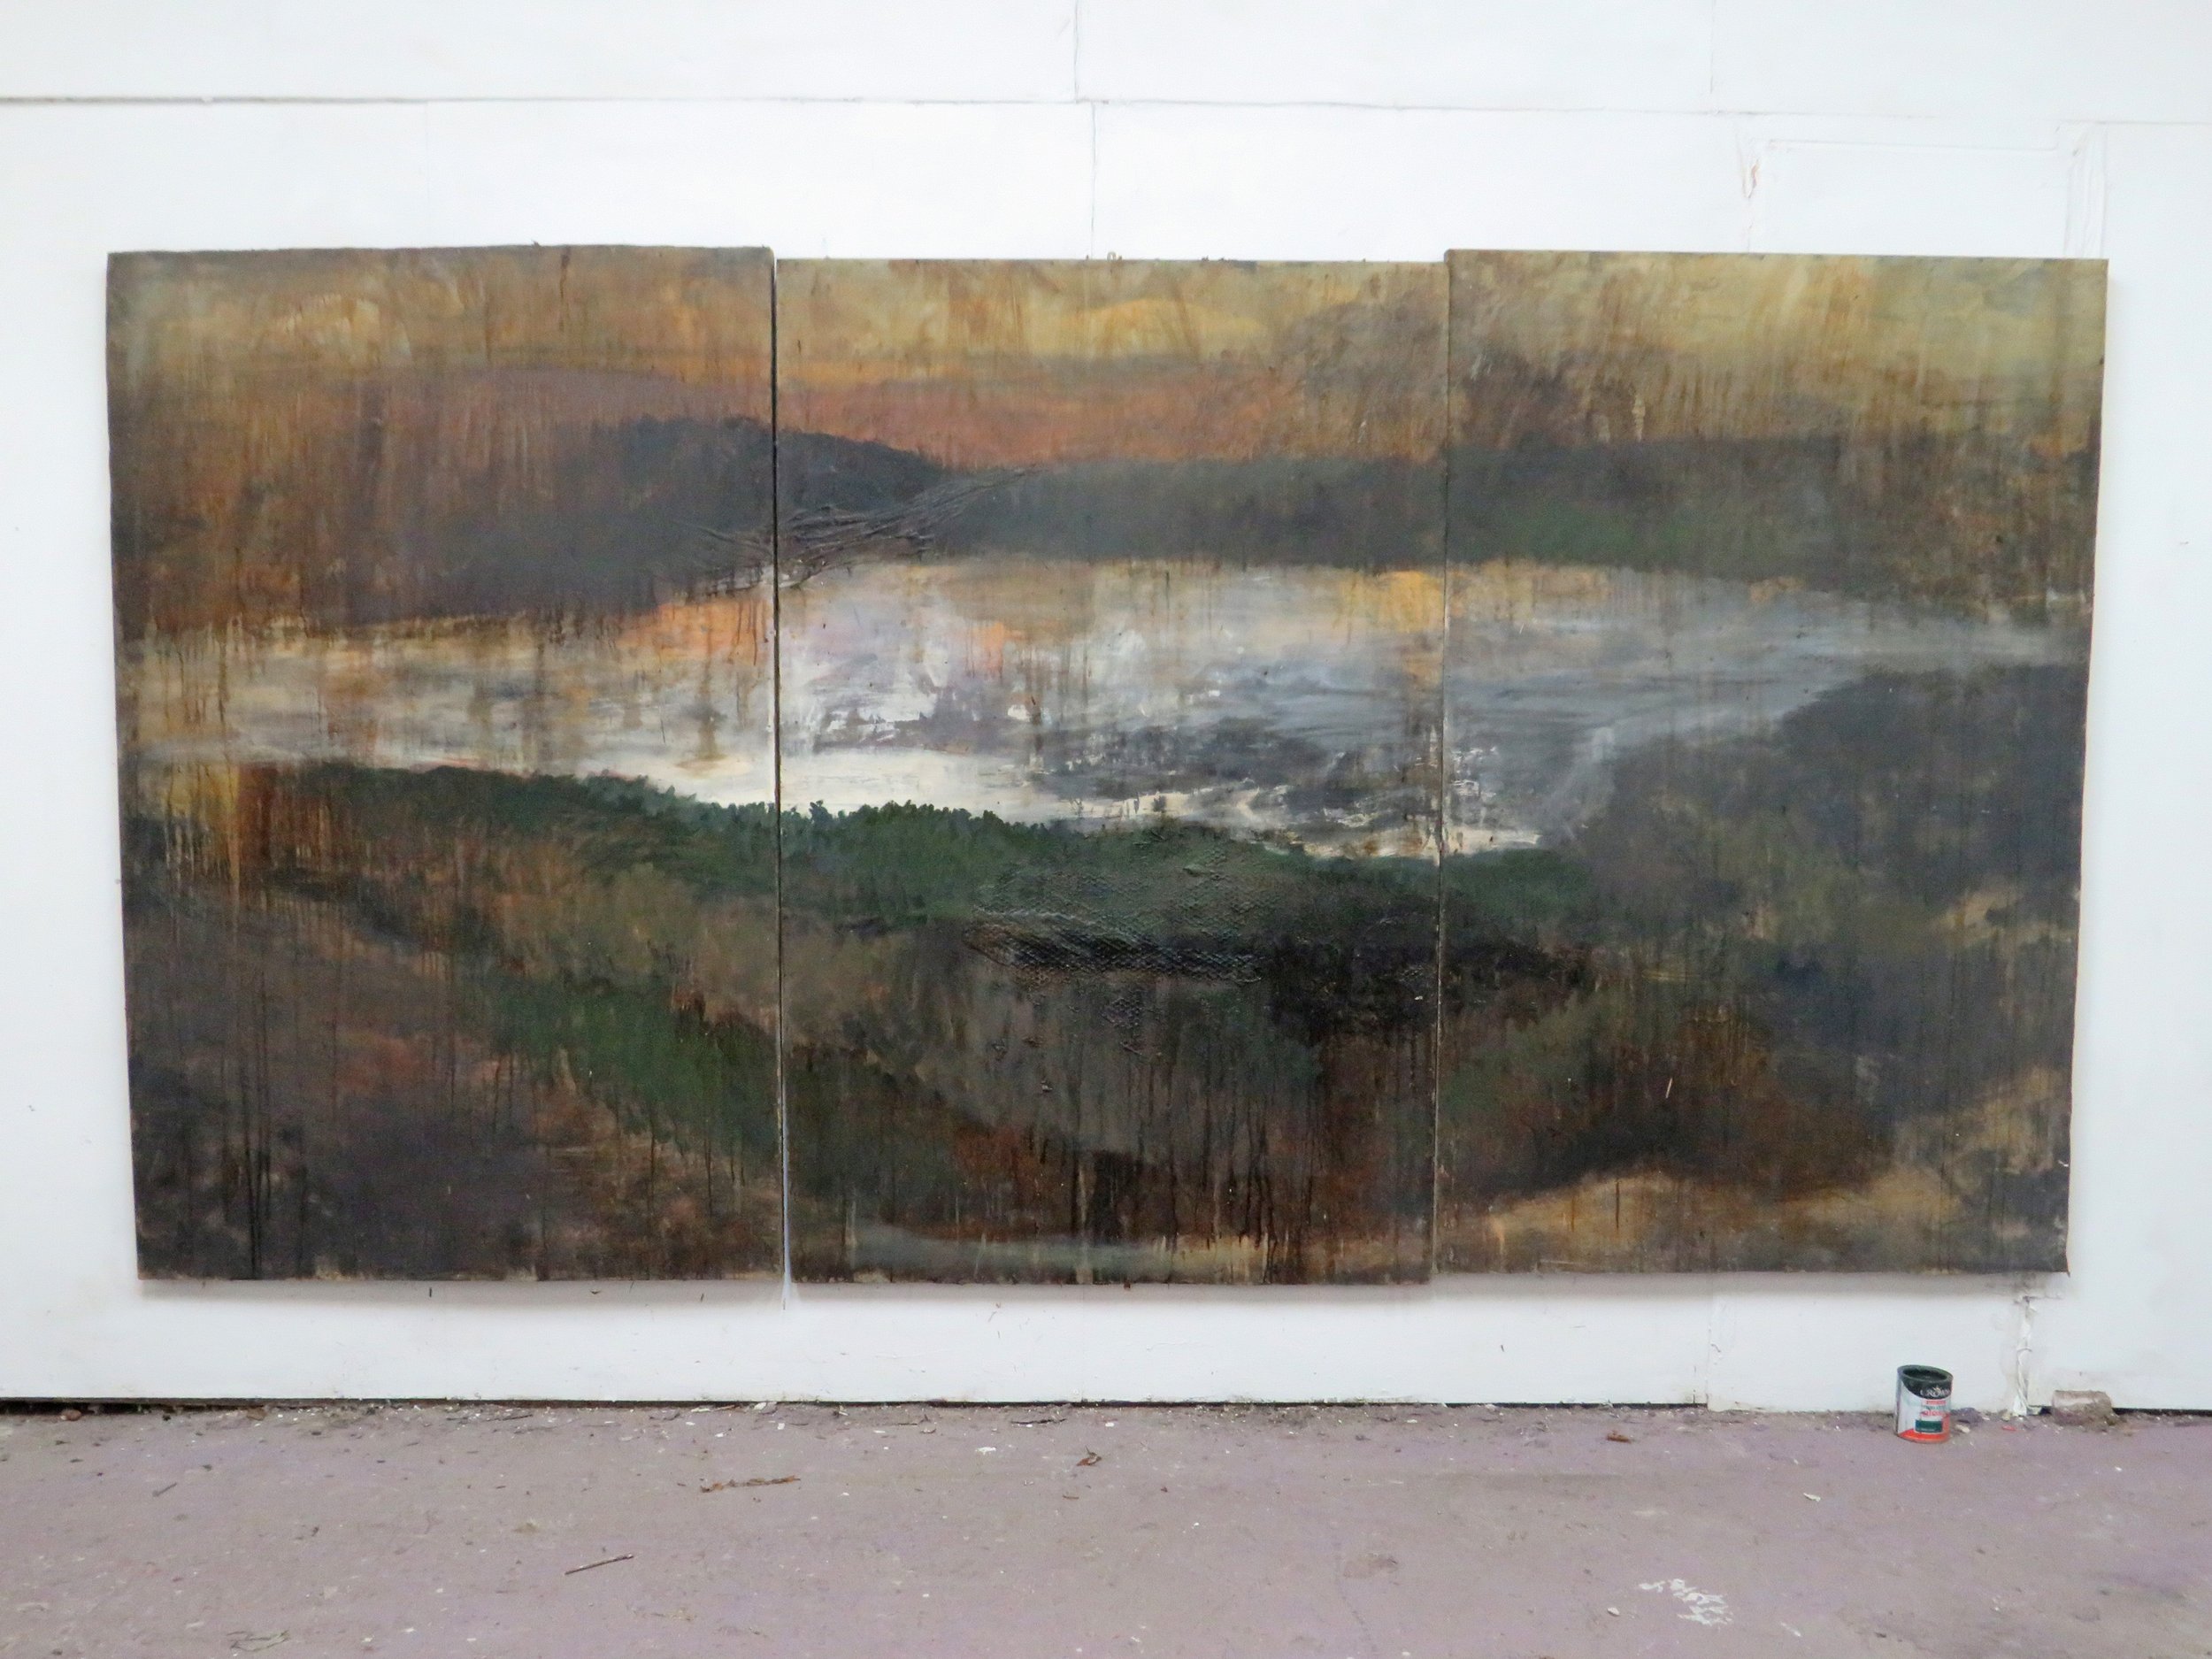 Conifer Forest, Moorland and reserviour 192 x 368 cms